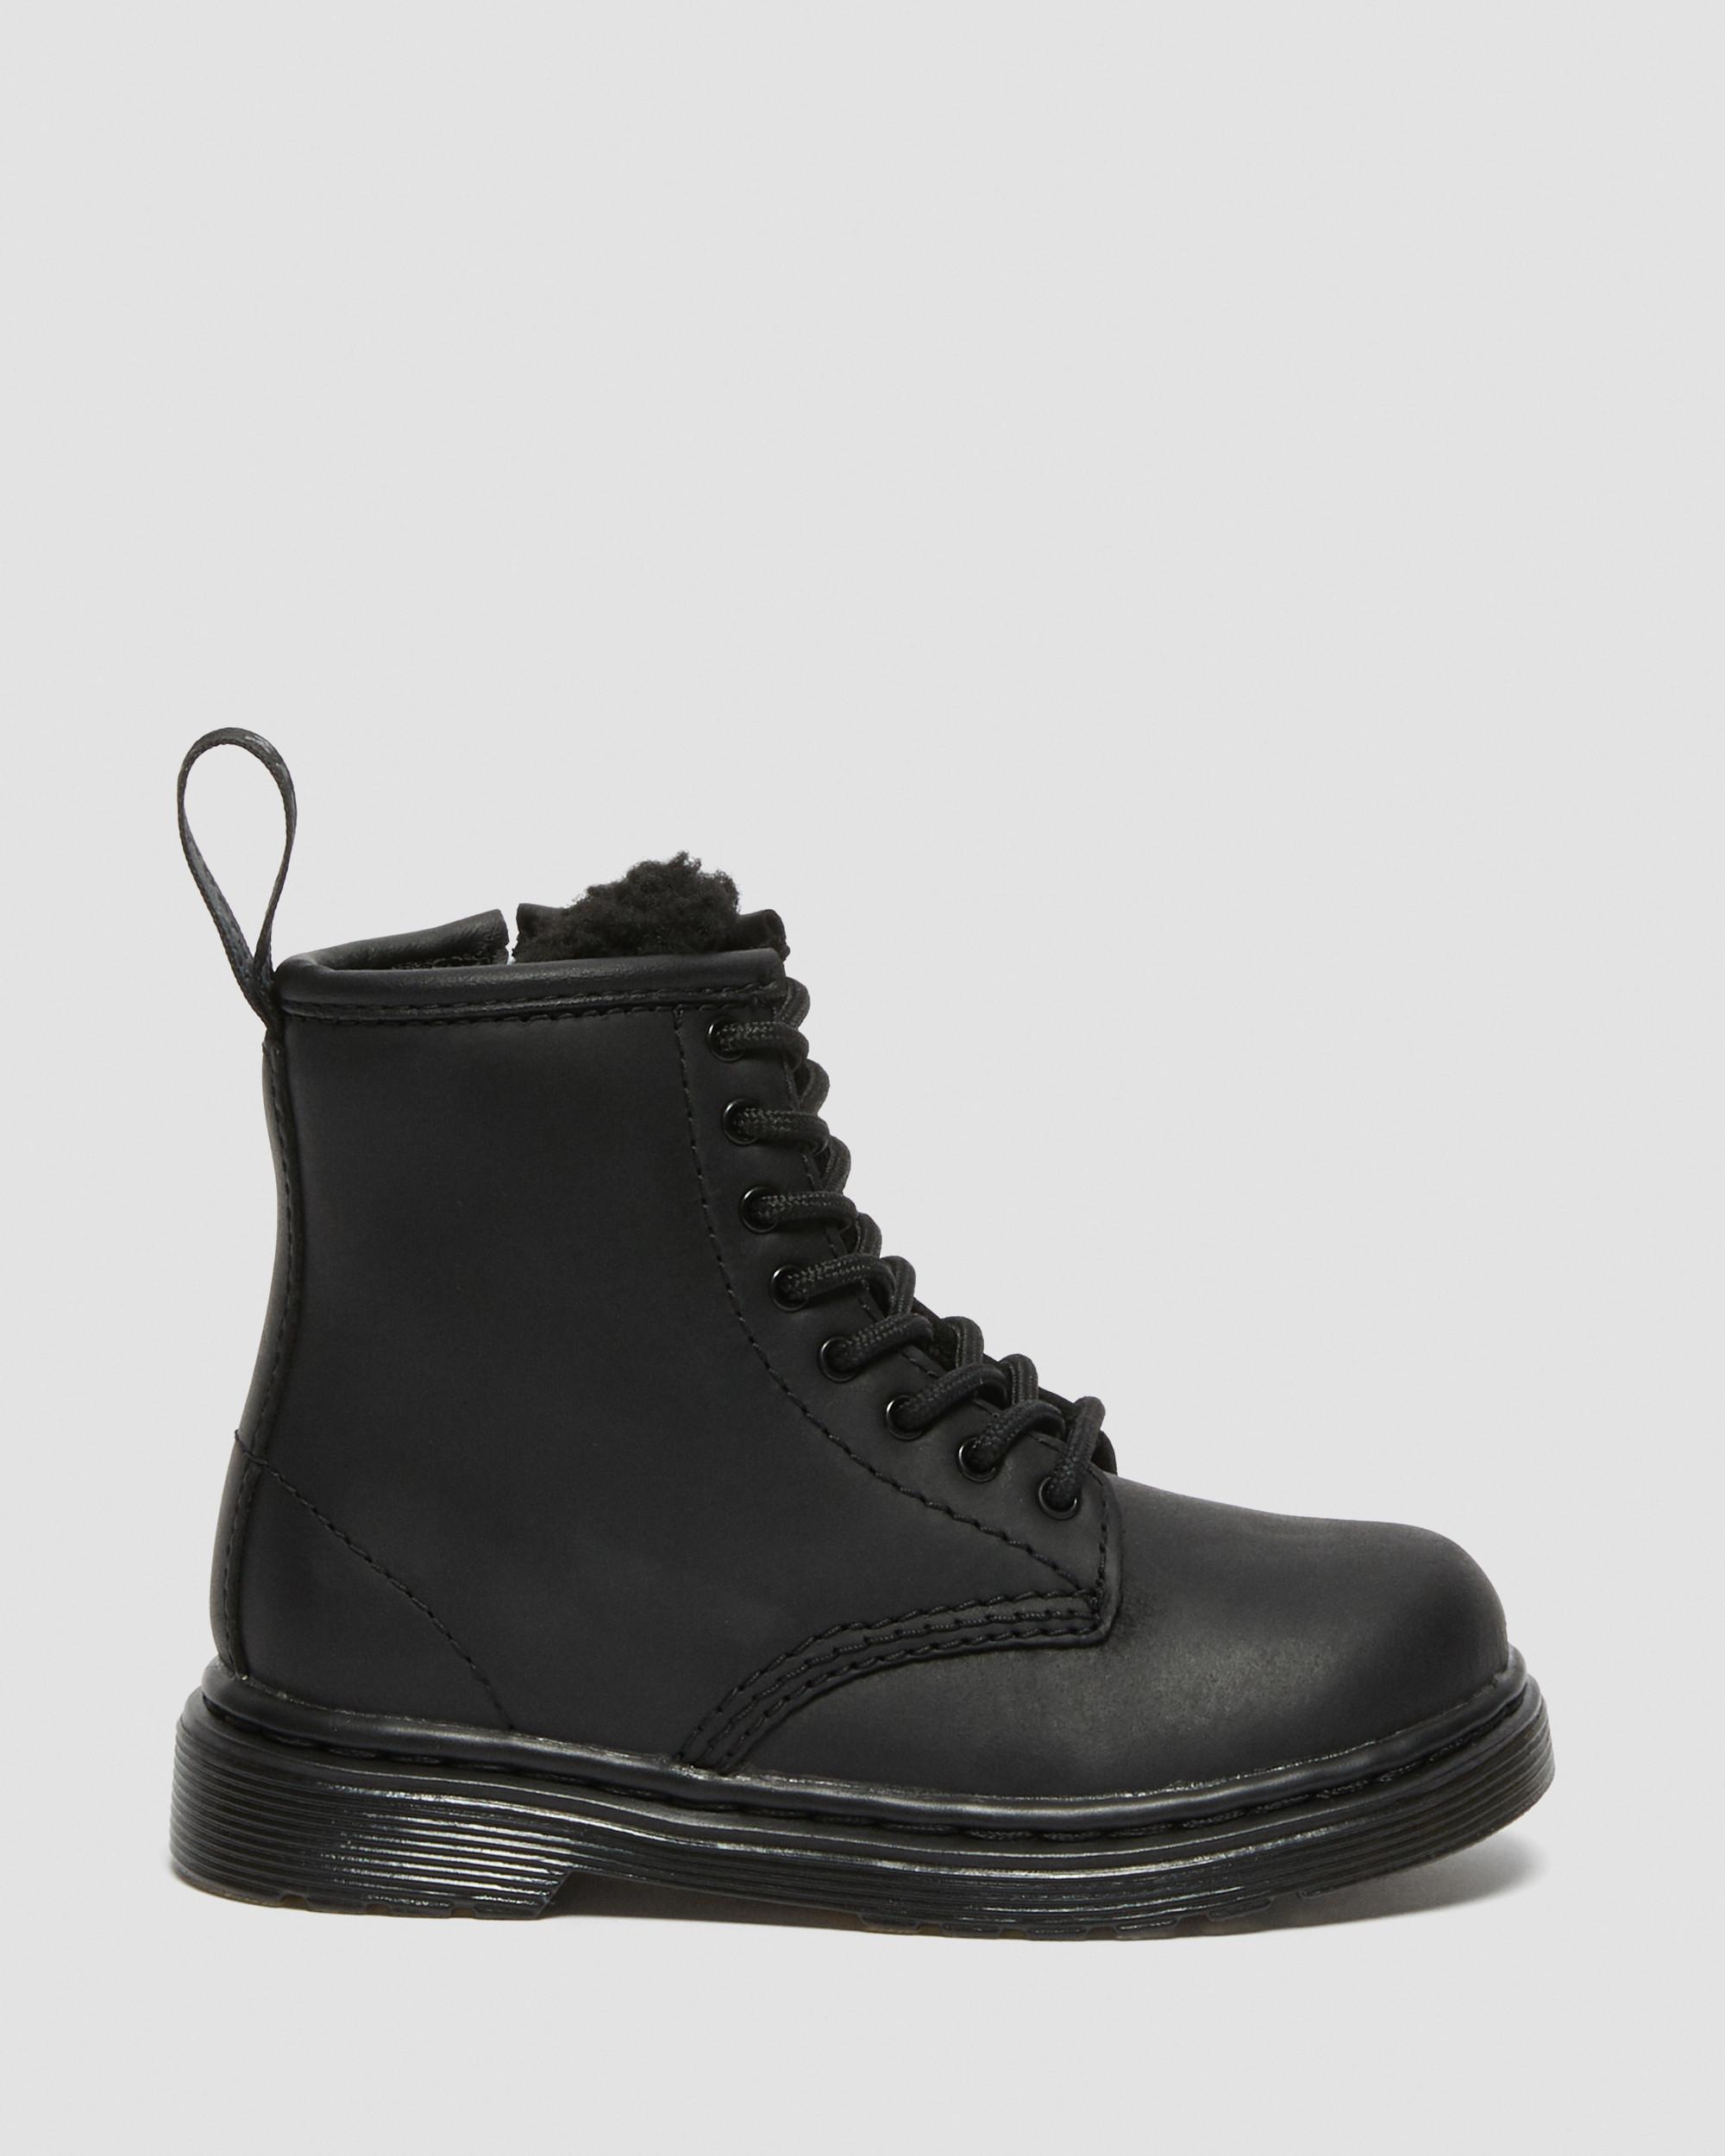 Toddler 1460 Faux Fur Lined Boots in Black | Dr. Martens